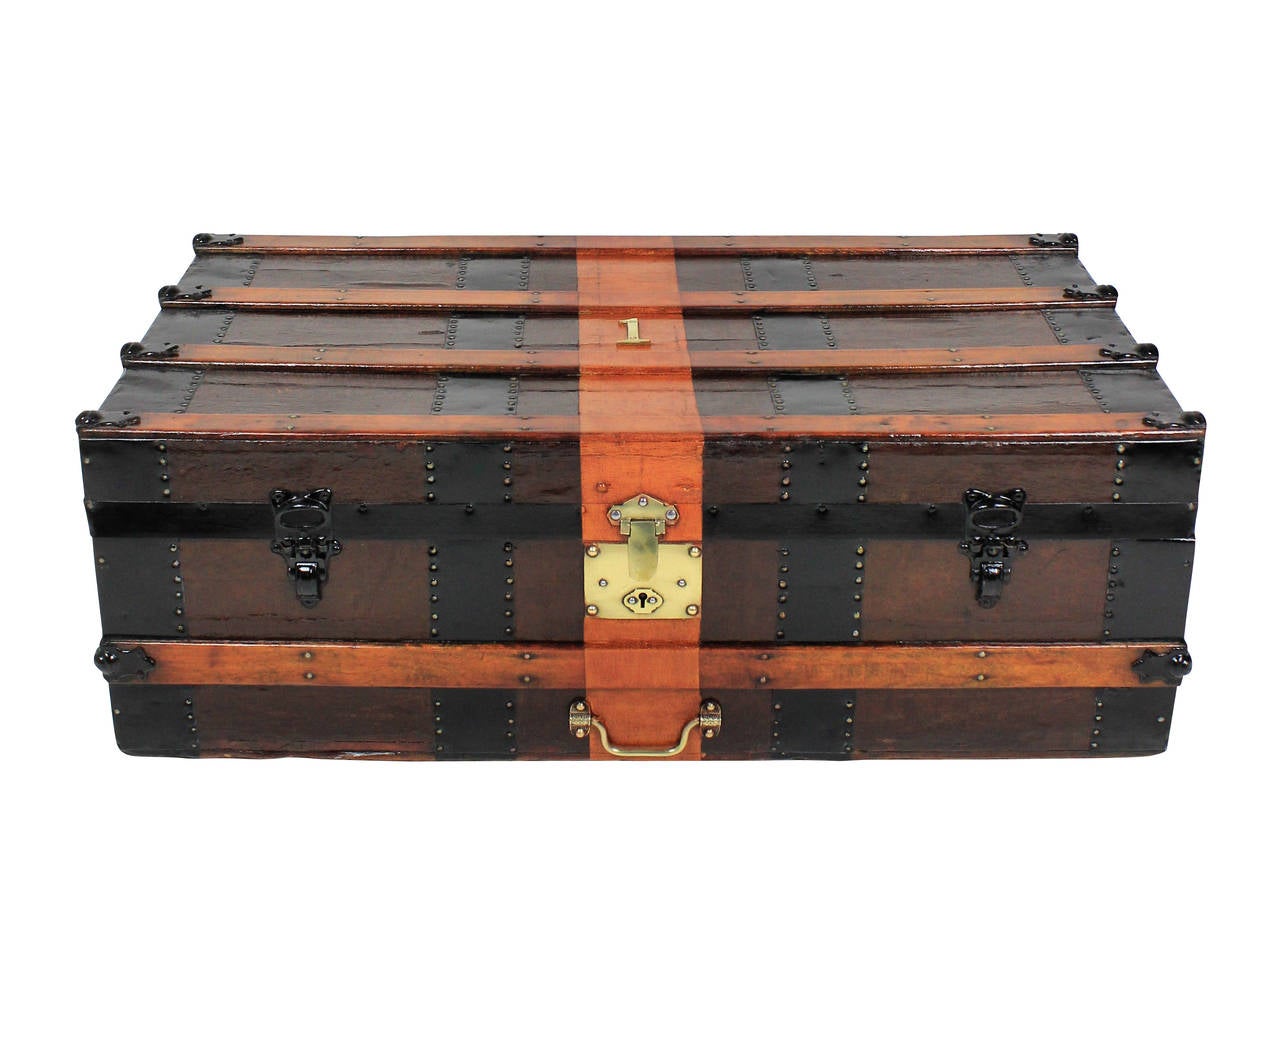 An English cabin trunk of good quality formerly from Apsley House or number one London.